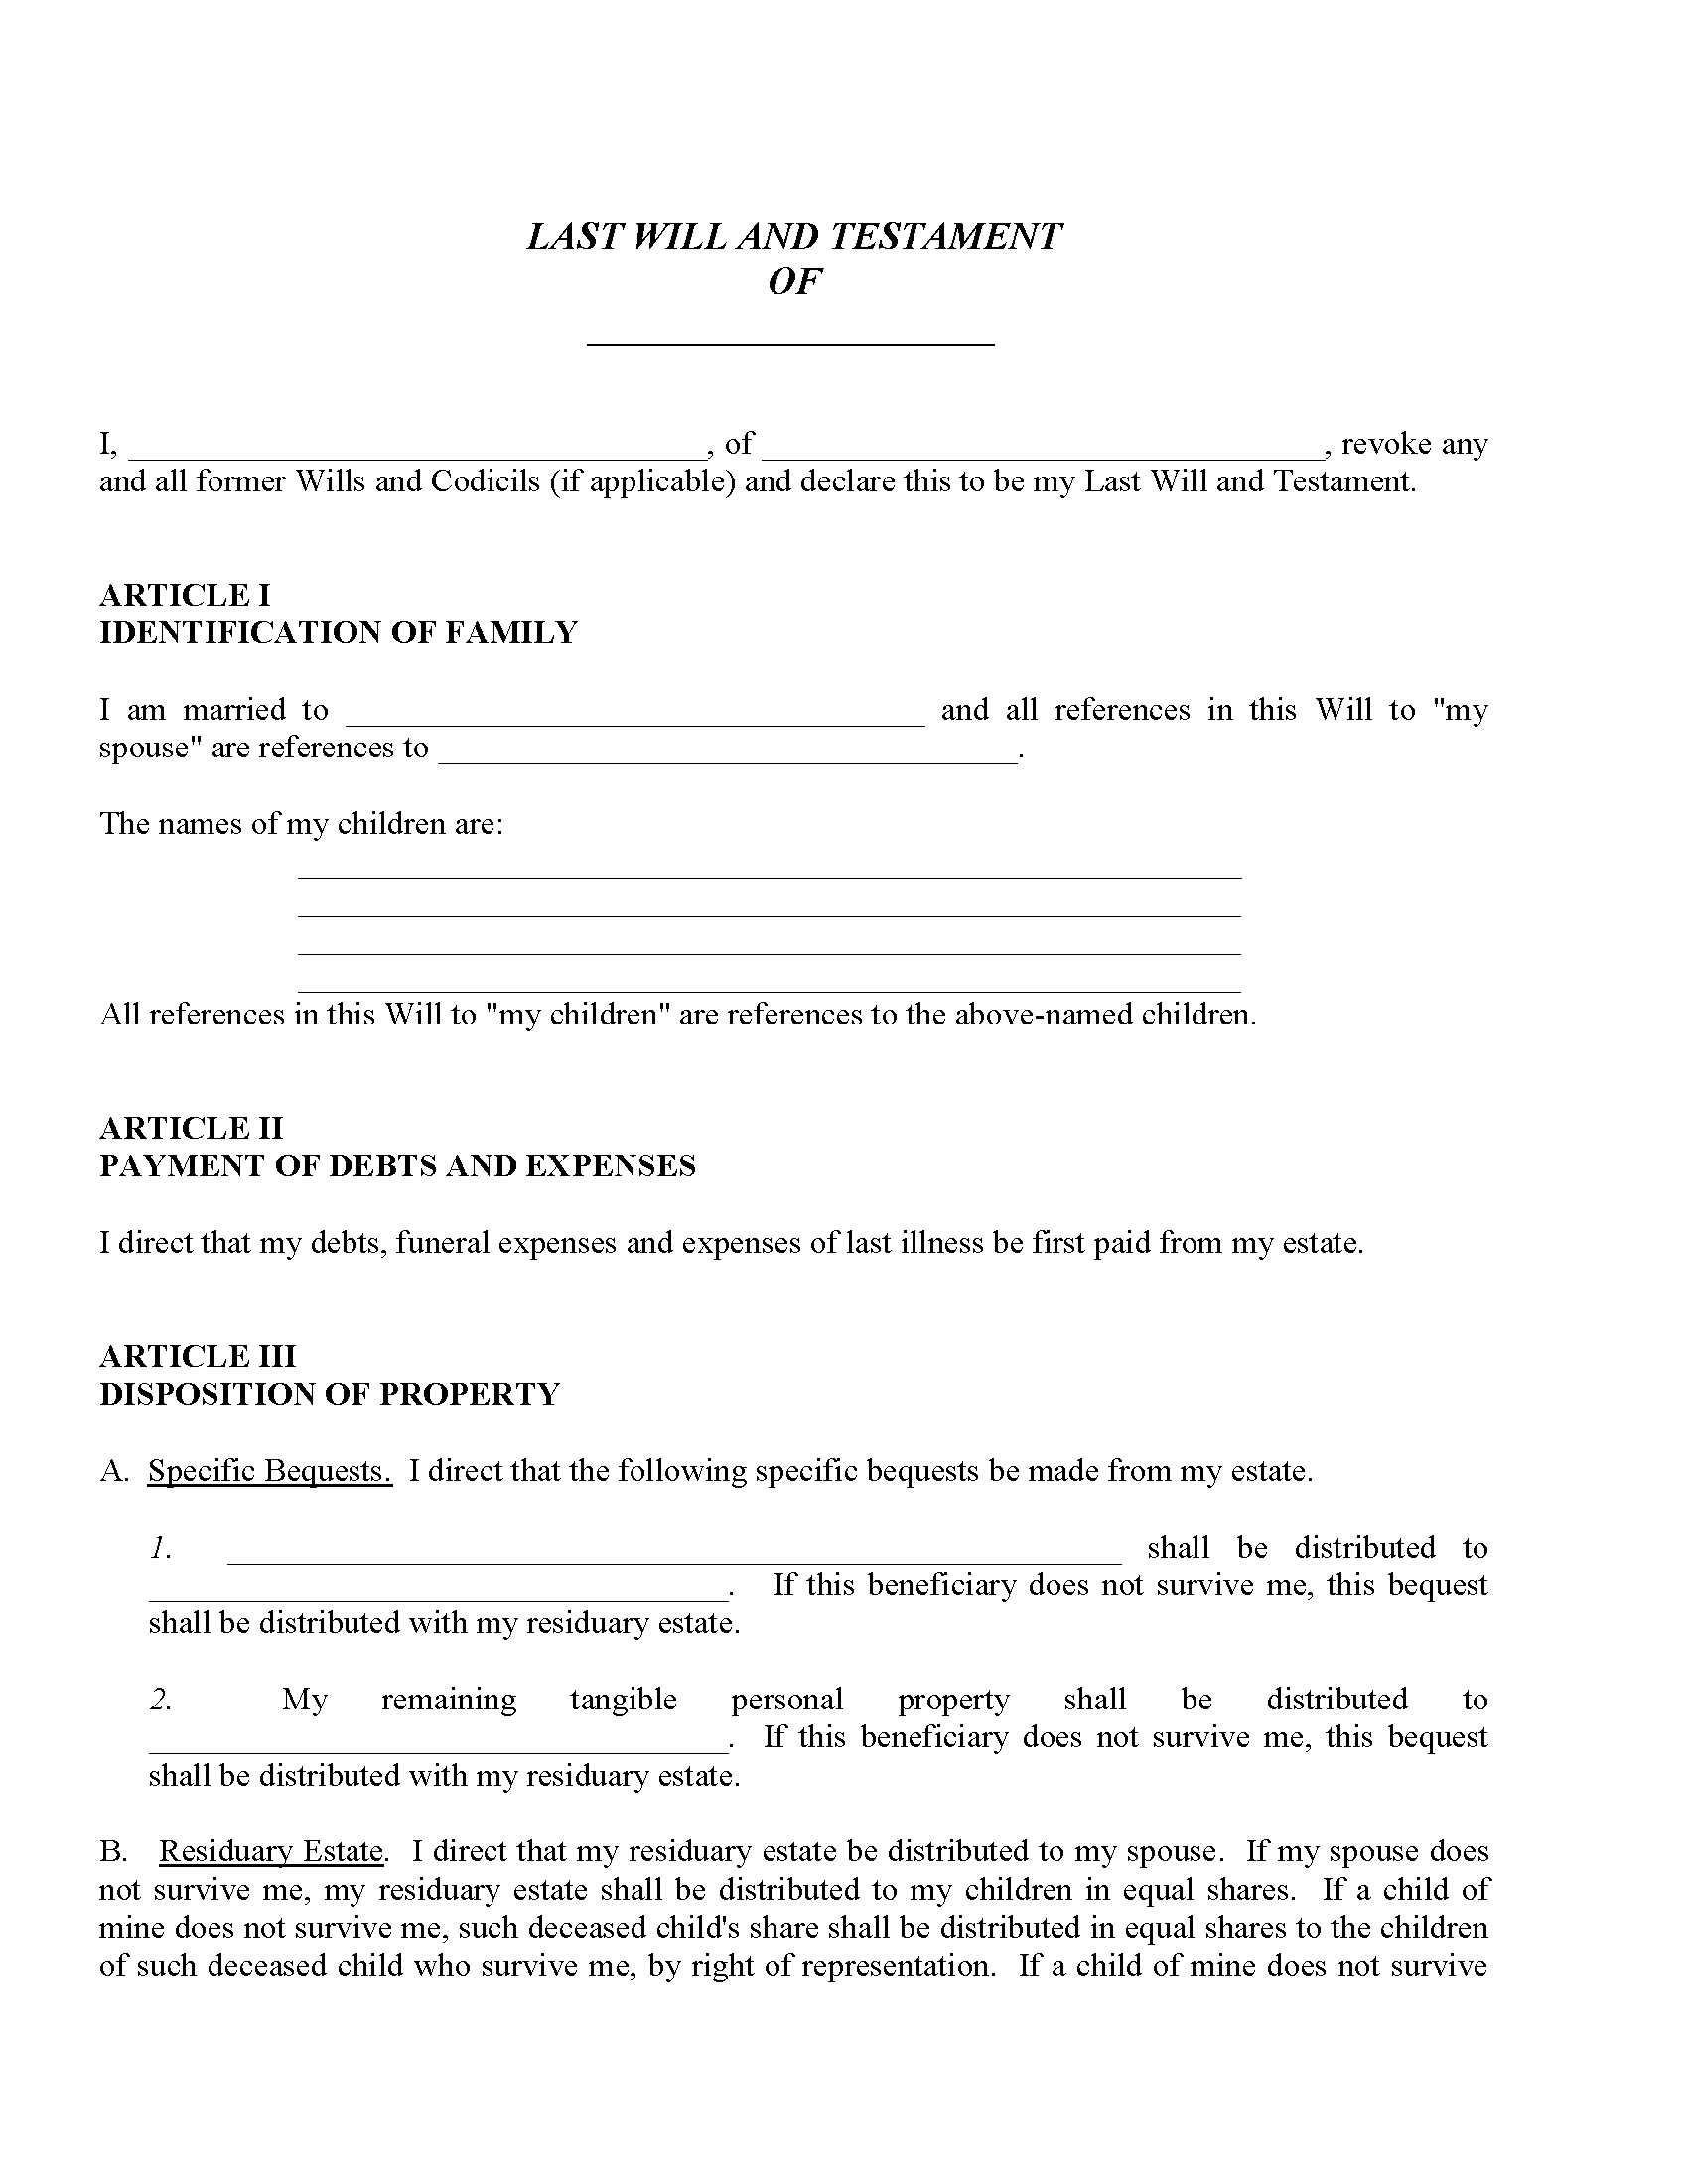 Alabama Wills and Codicils Free Printable Legal Forms